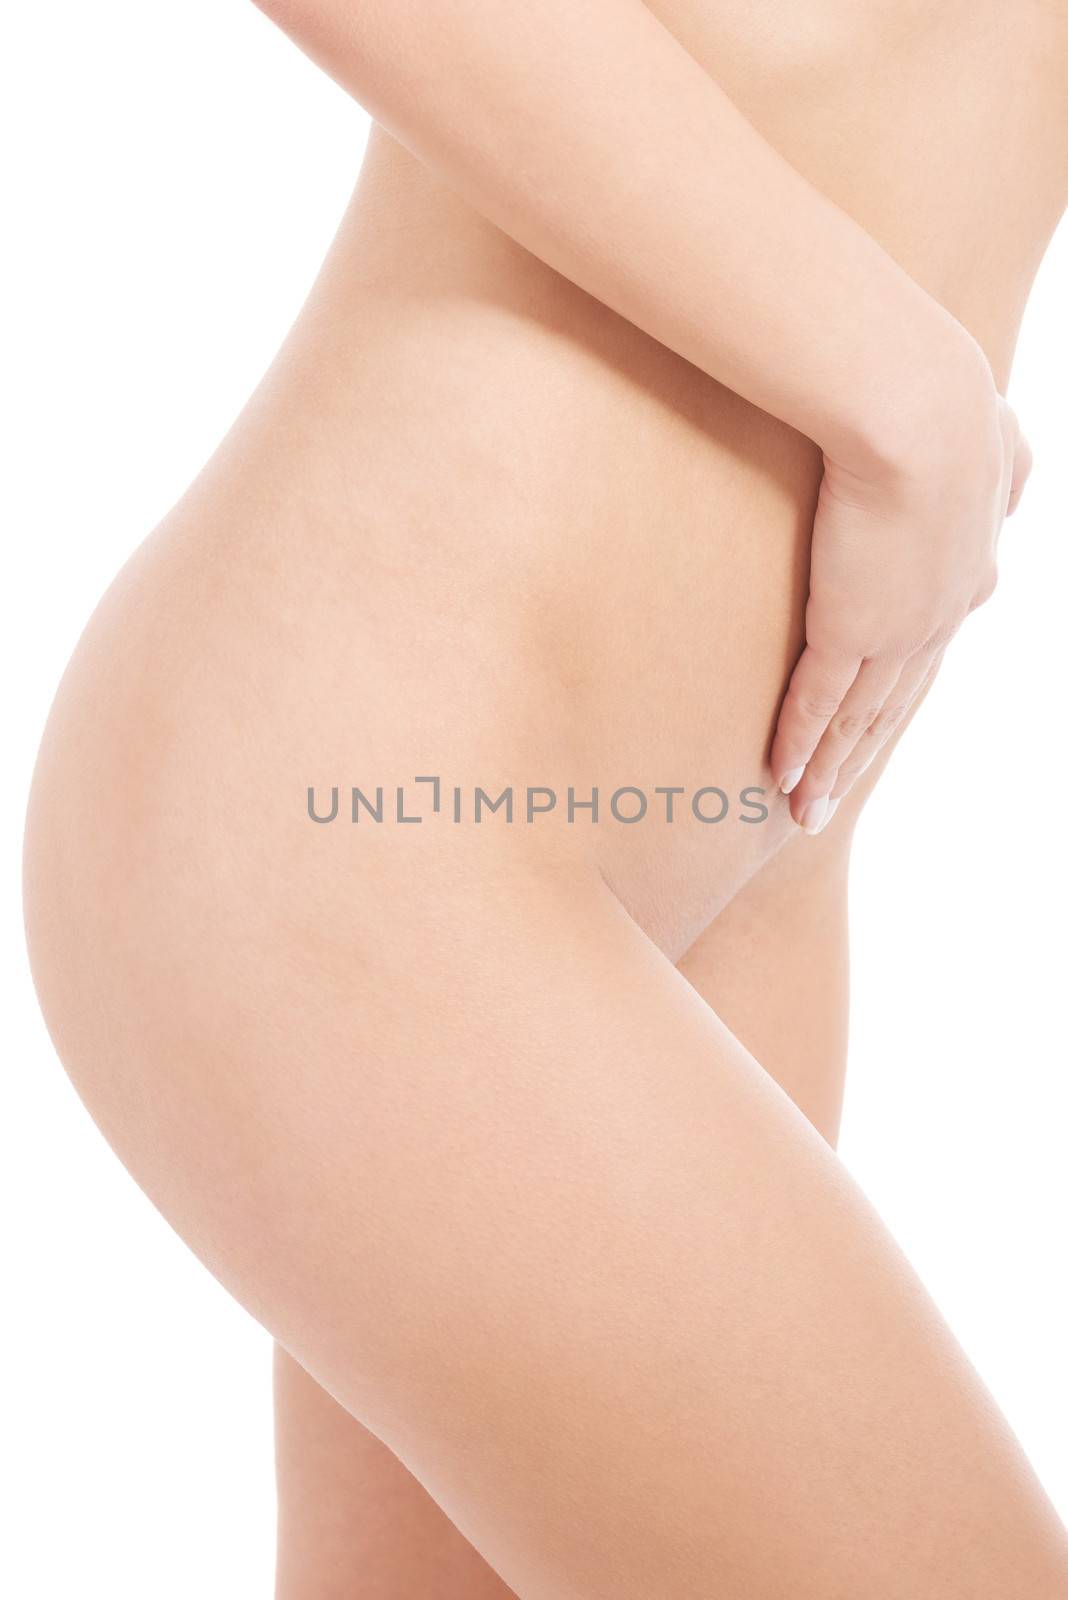 Woman's flat belly. Slim figure. Isolated on white.